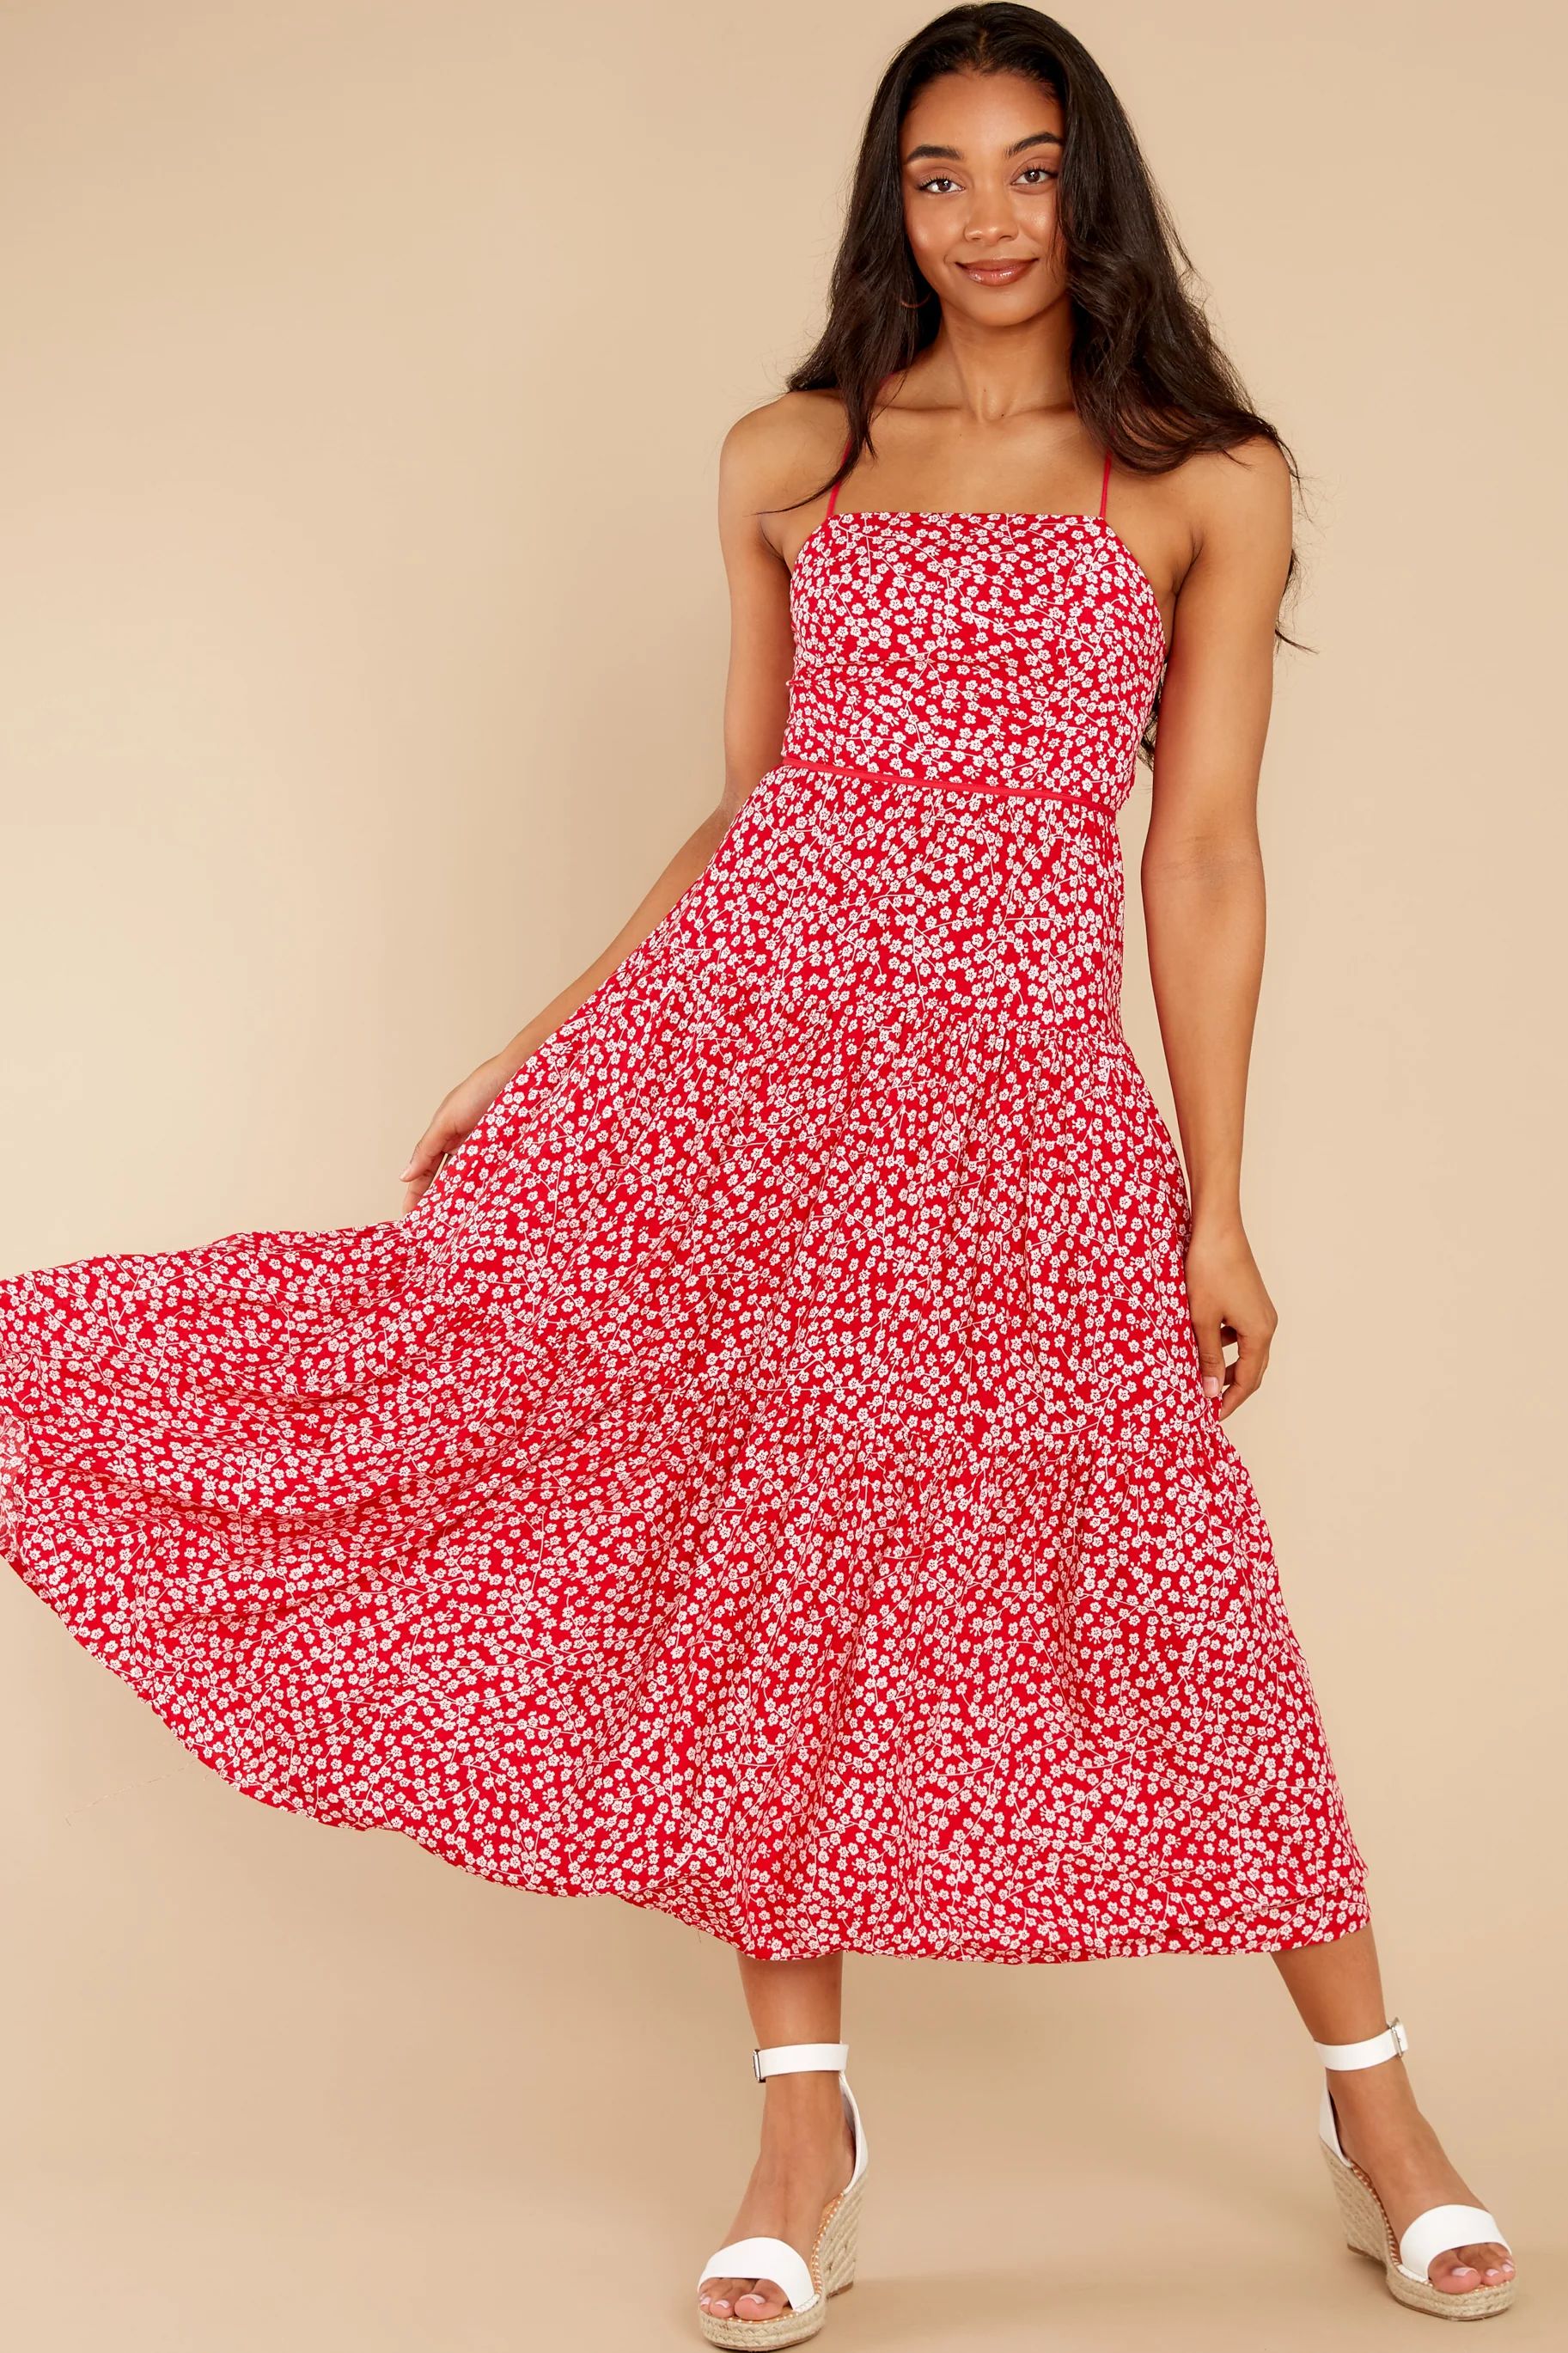 Too Perfect Red Floral Print Maxi Dress | Red Dress 